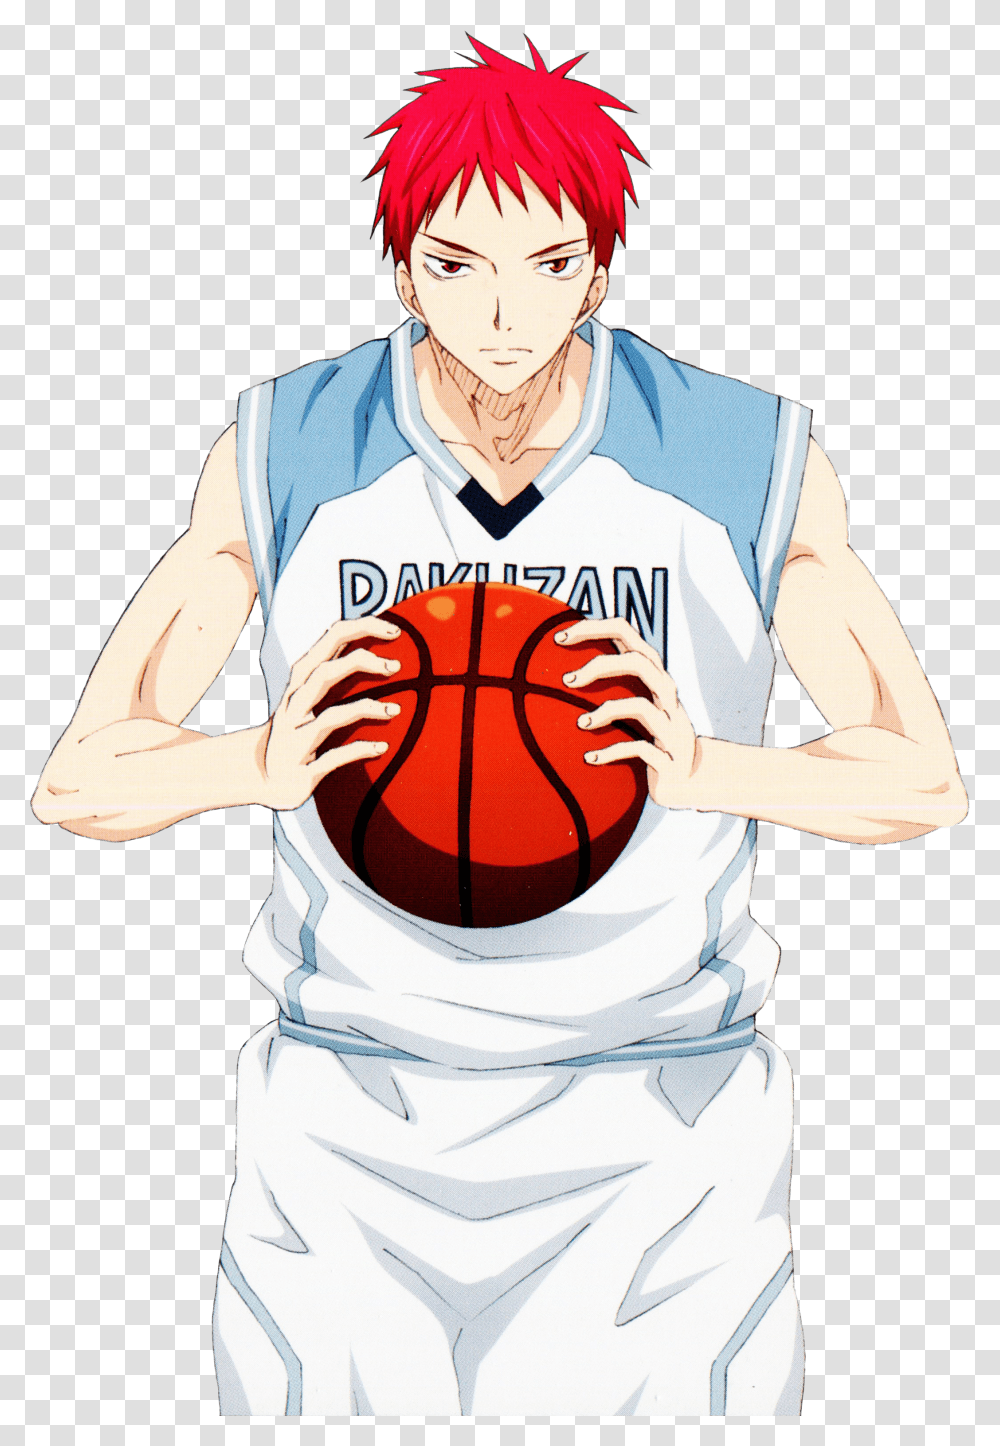 Basketball Player Anime Character Transparent Png